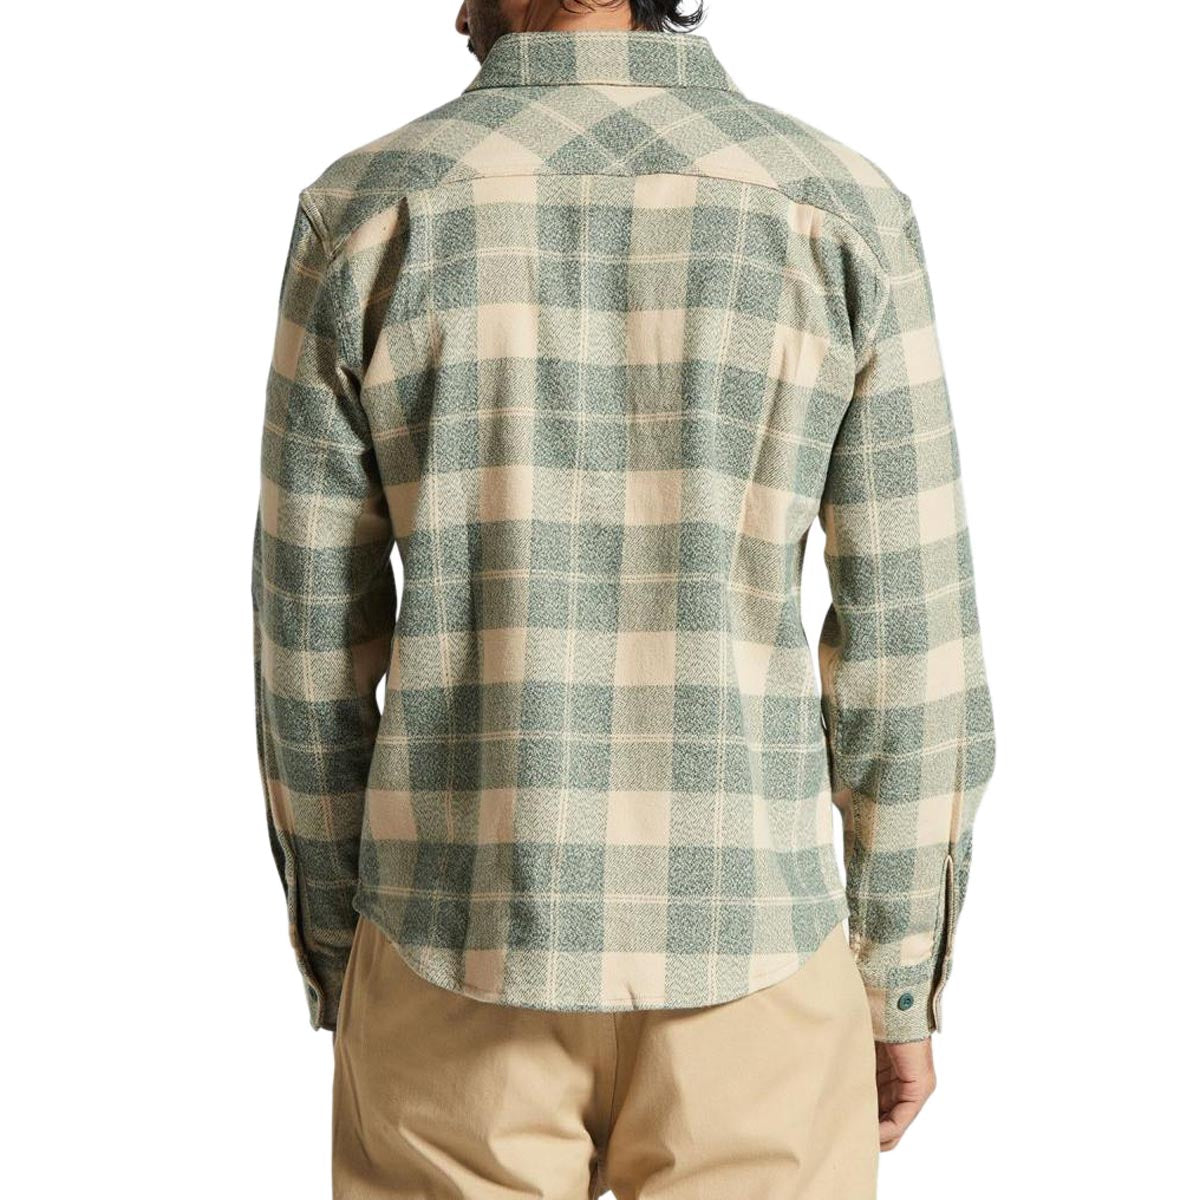 Brixton Bowery Stretch Water Resistant Flannel Shirt - Trekking Green/Oatmilk image 2